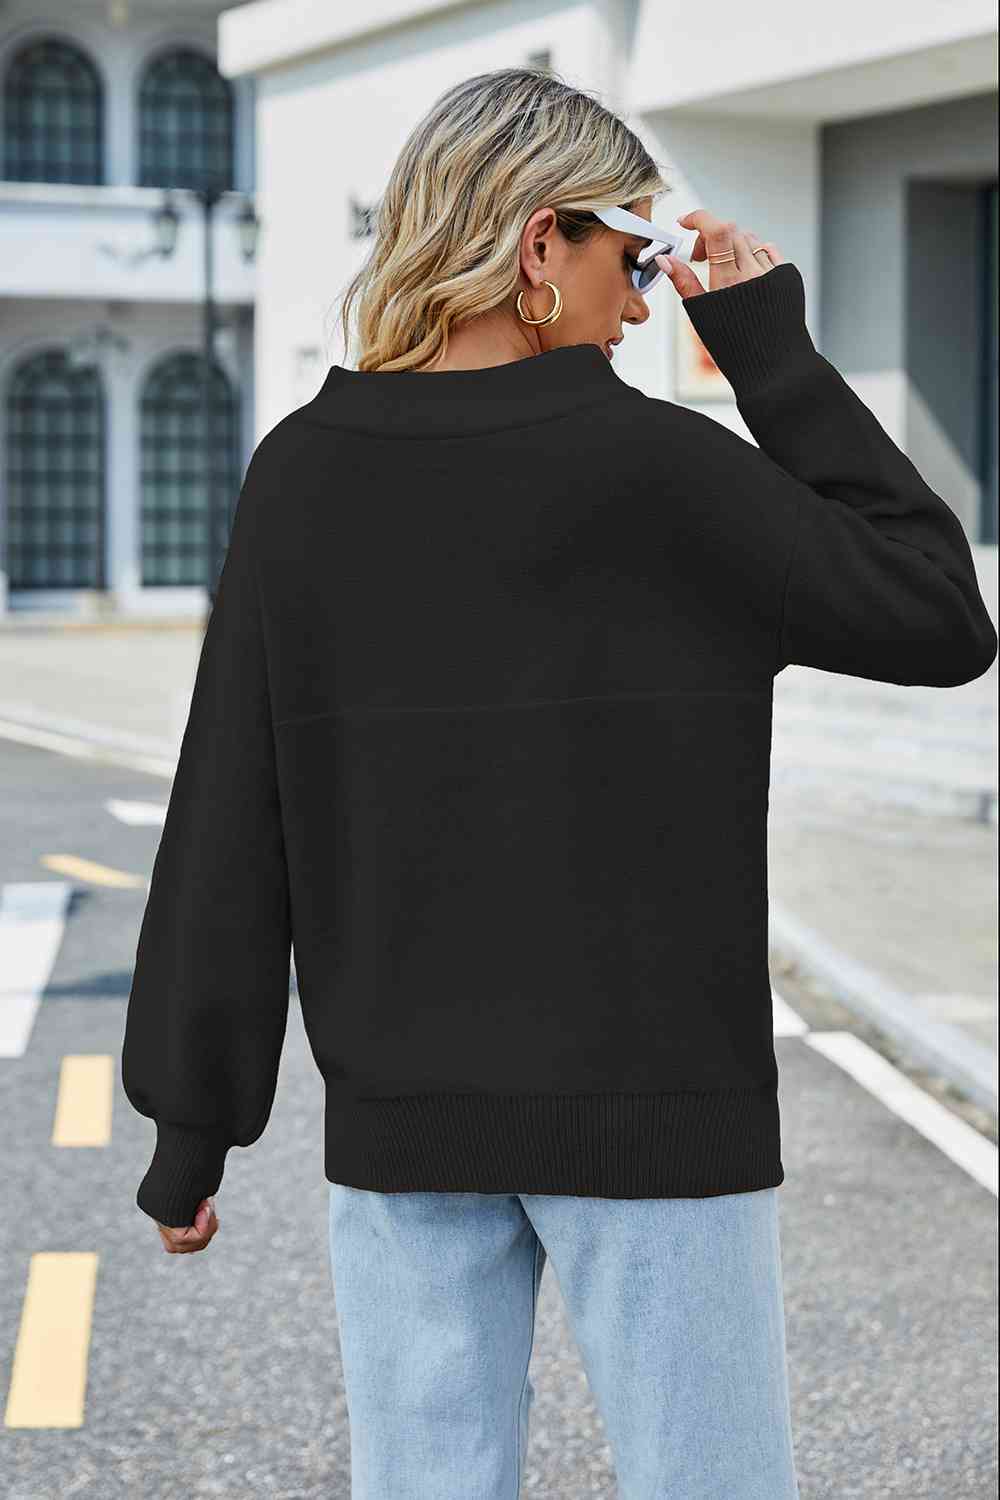 Trendsi sweater Gypsy Long Sleeve Ribbed Trim Sweater